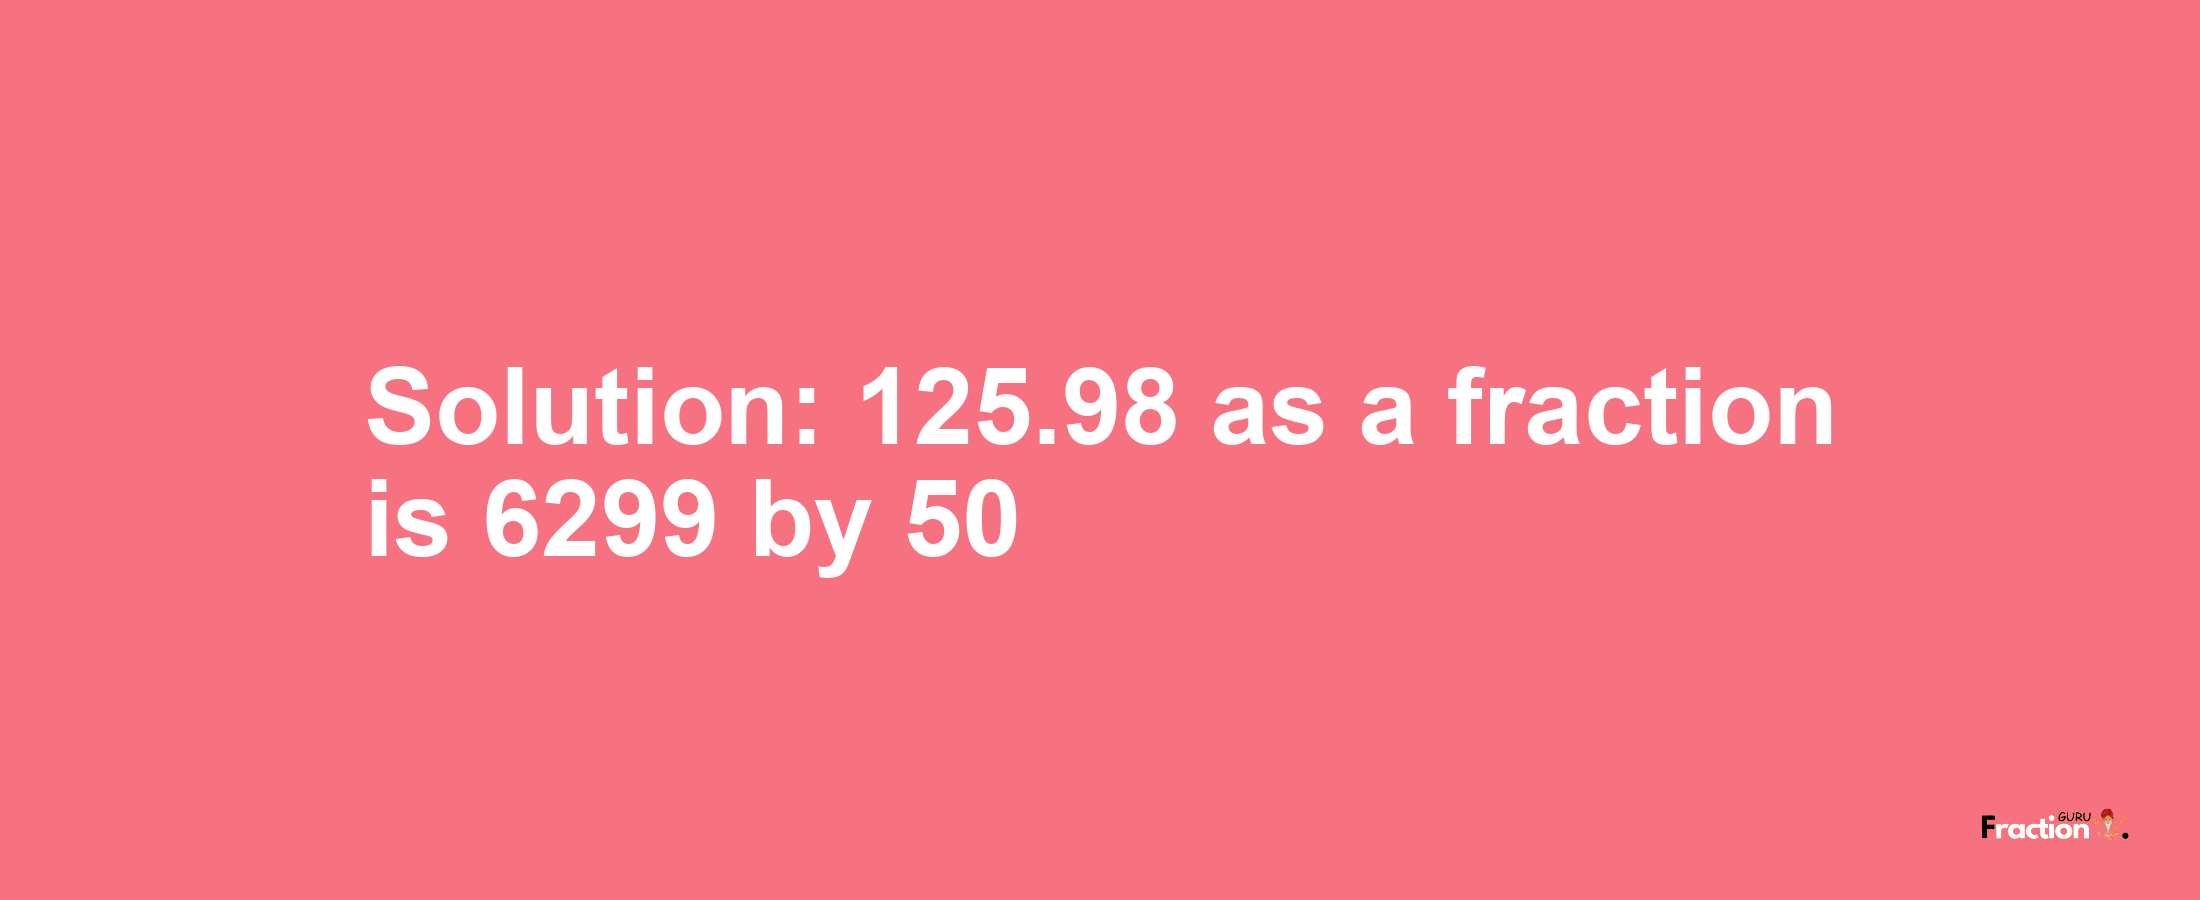 Solution:125.98 as a fraction is 6299/50